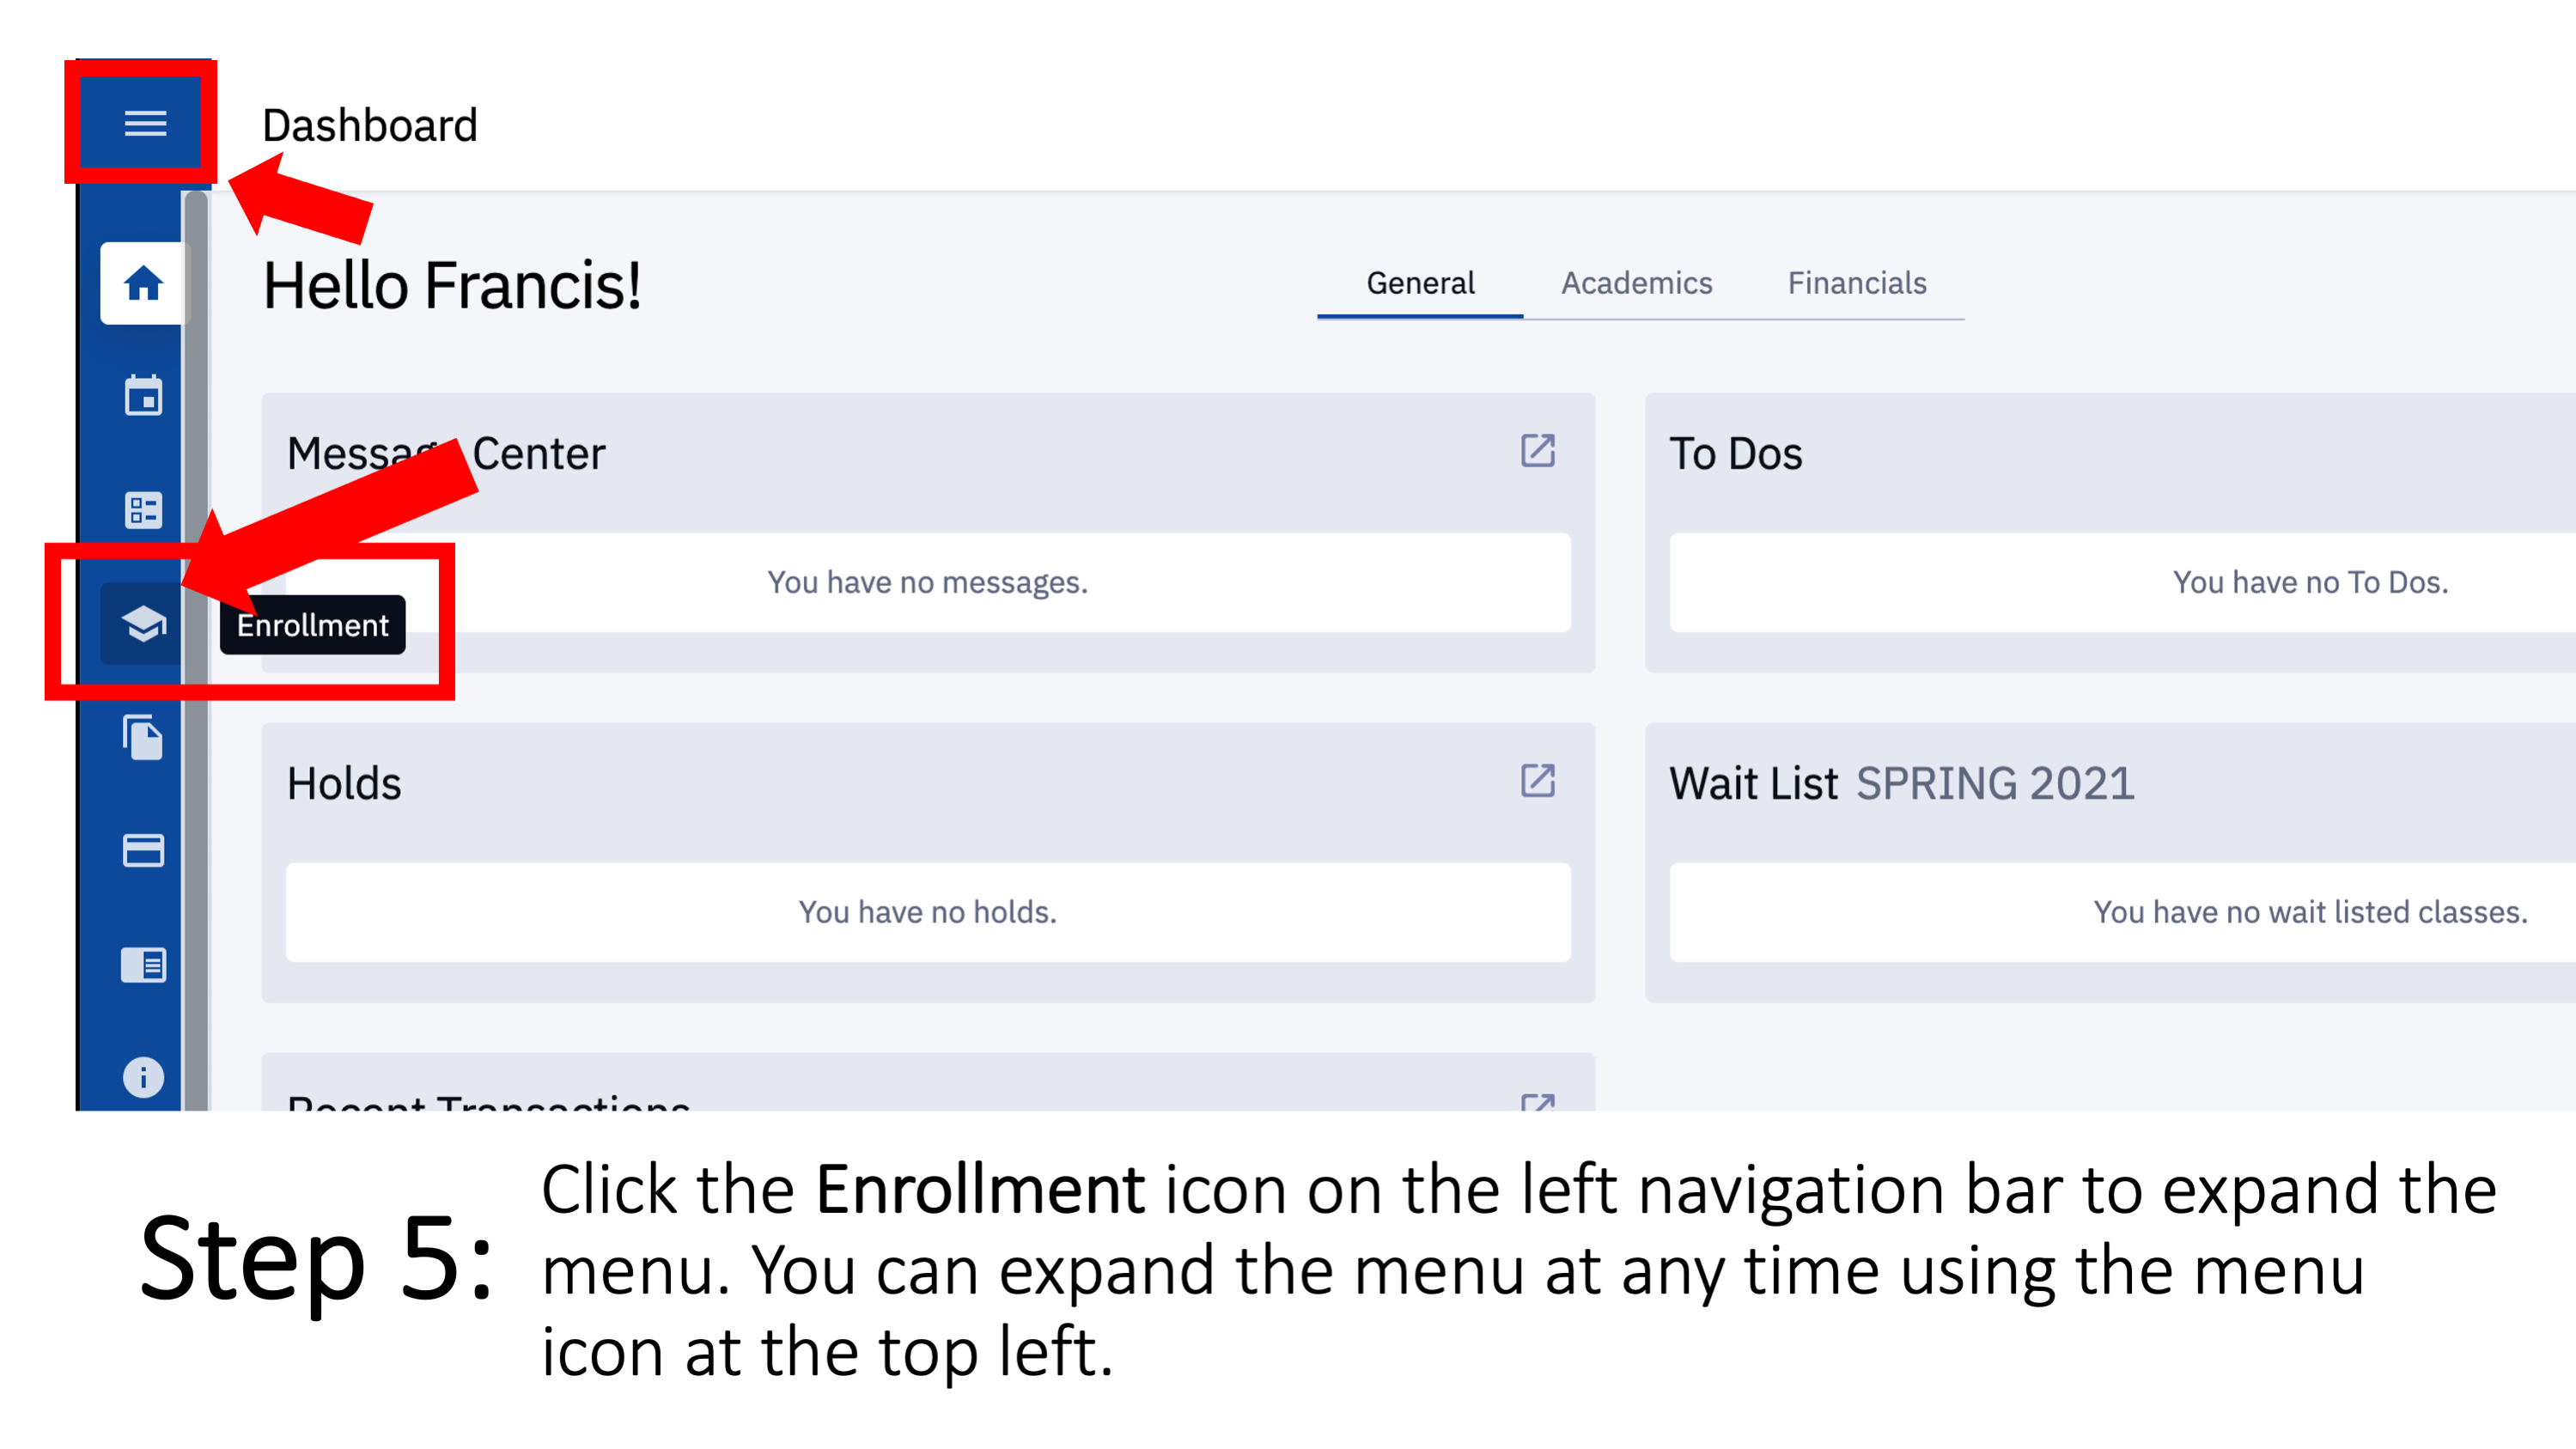 Step 5: Click the Enrollment icon on the left navigation bar to expand the menu. You can expand the menu at any time using the menu icon at the top left.